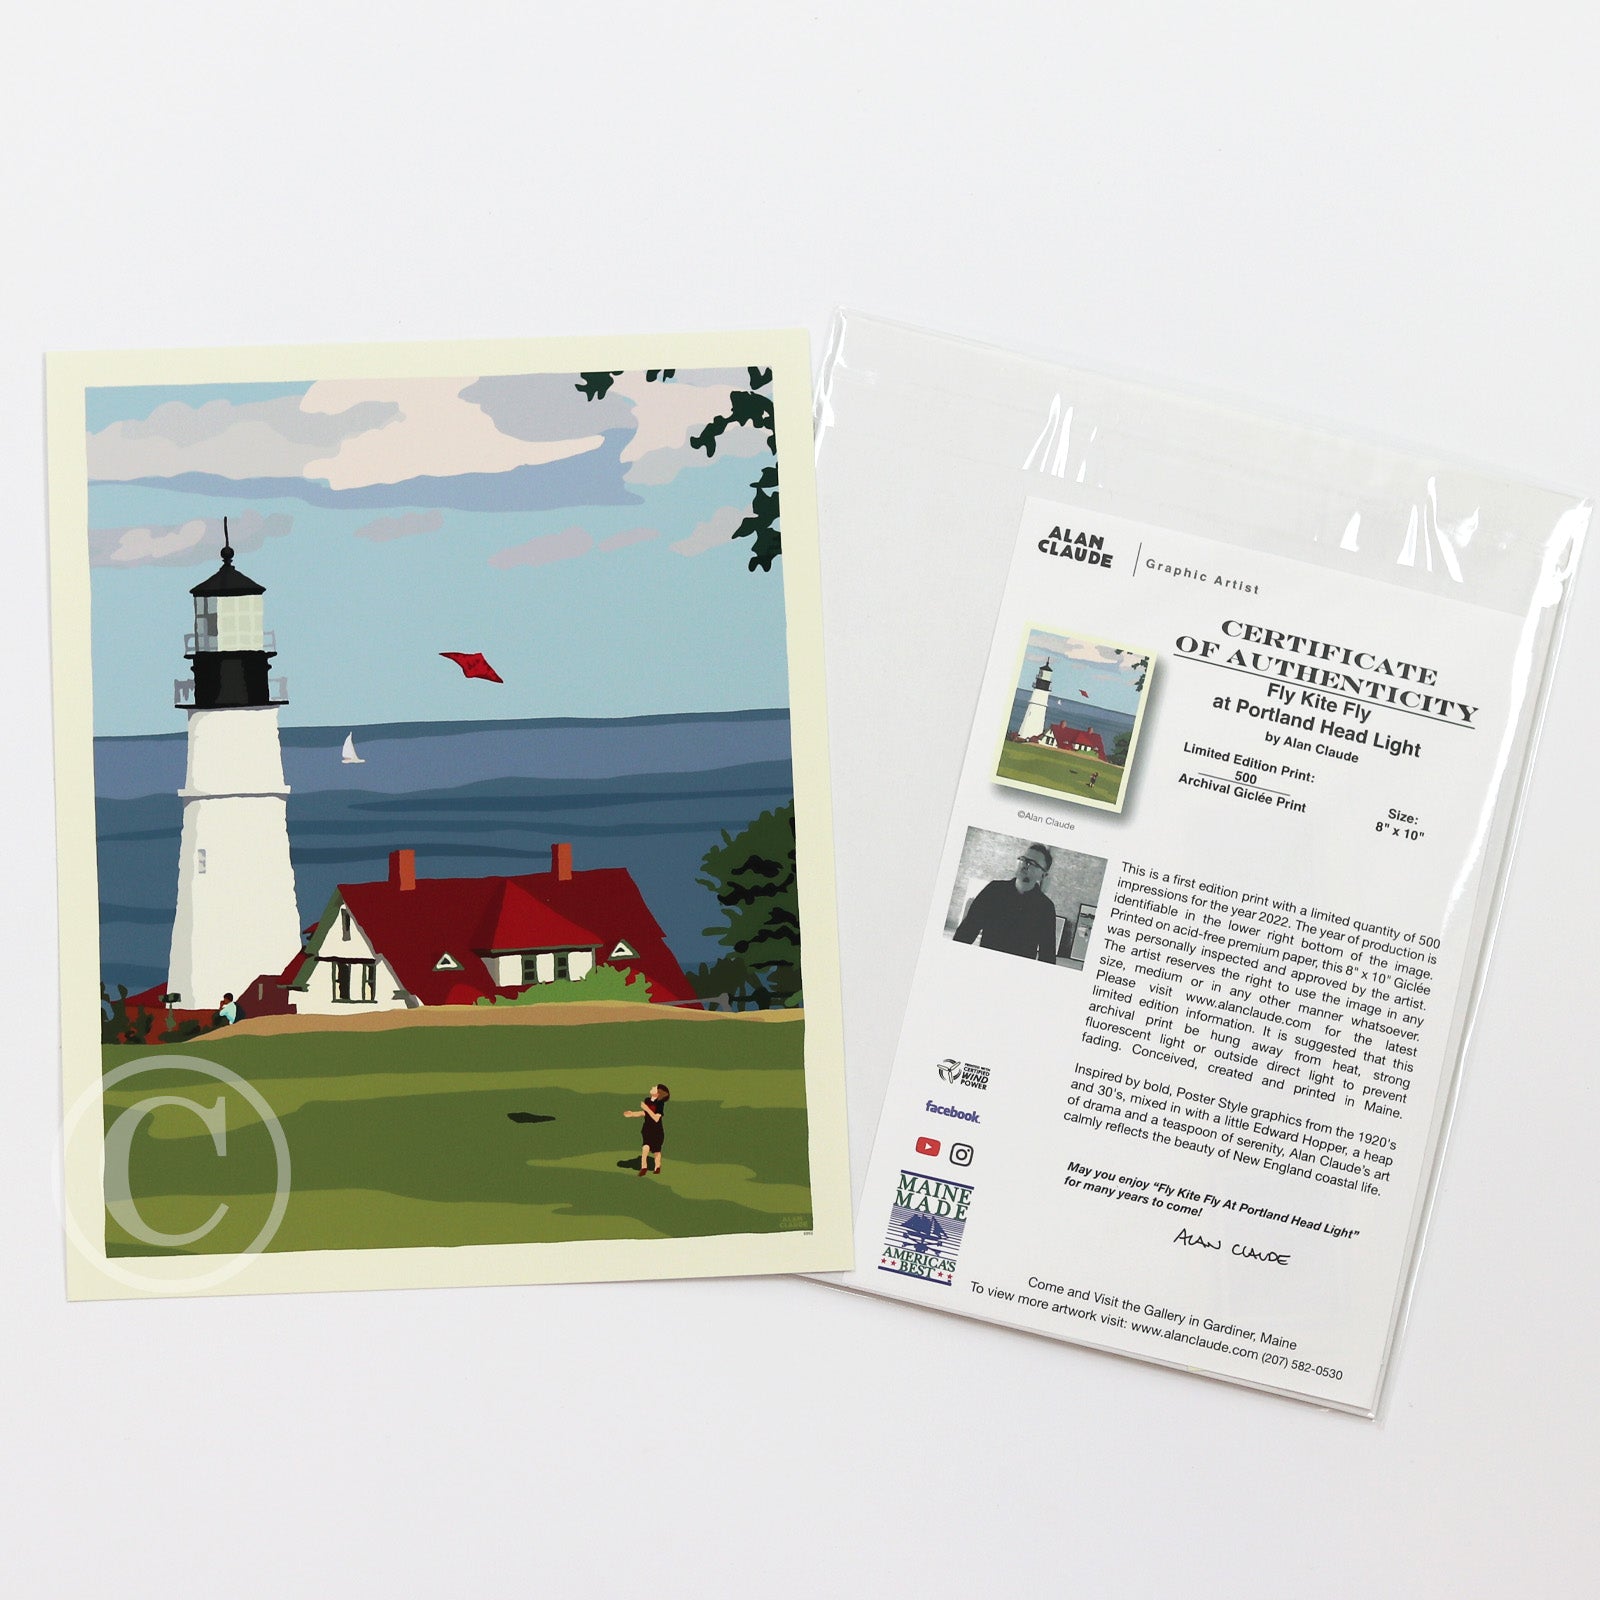 Fly Kite Fly at Portland Head Light Art Print 8" x 10" Wall Poster By Alan Claude - Maine